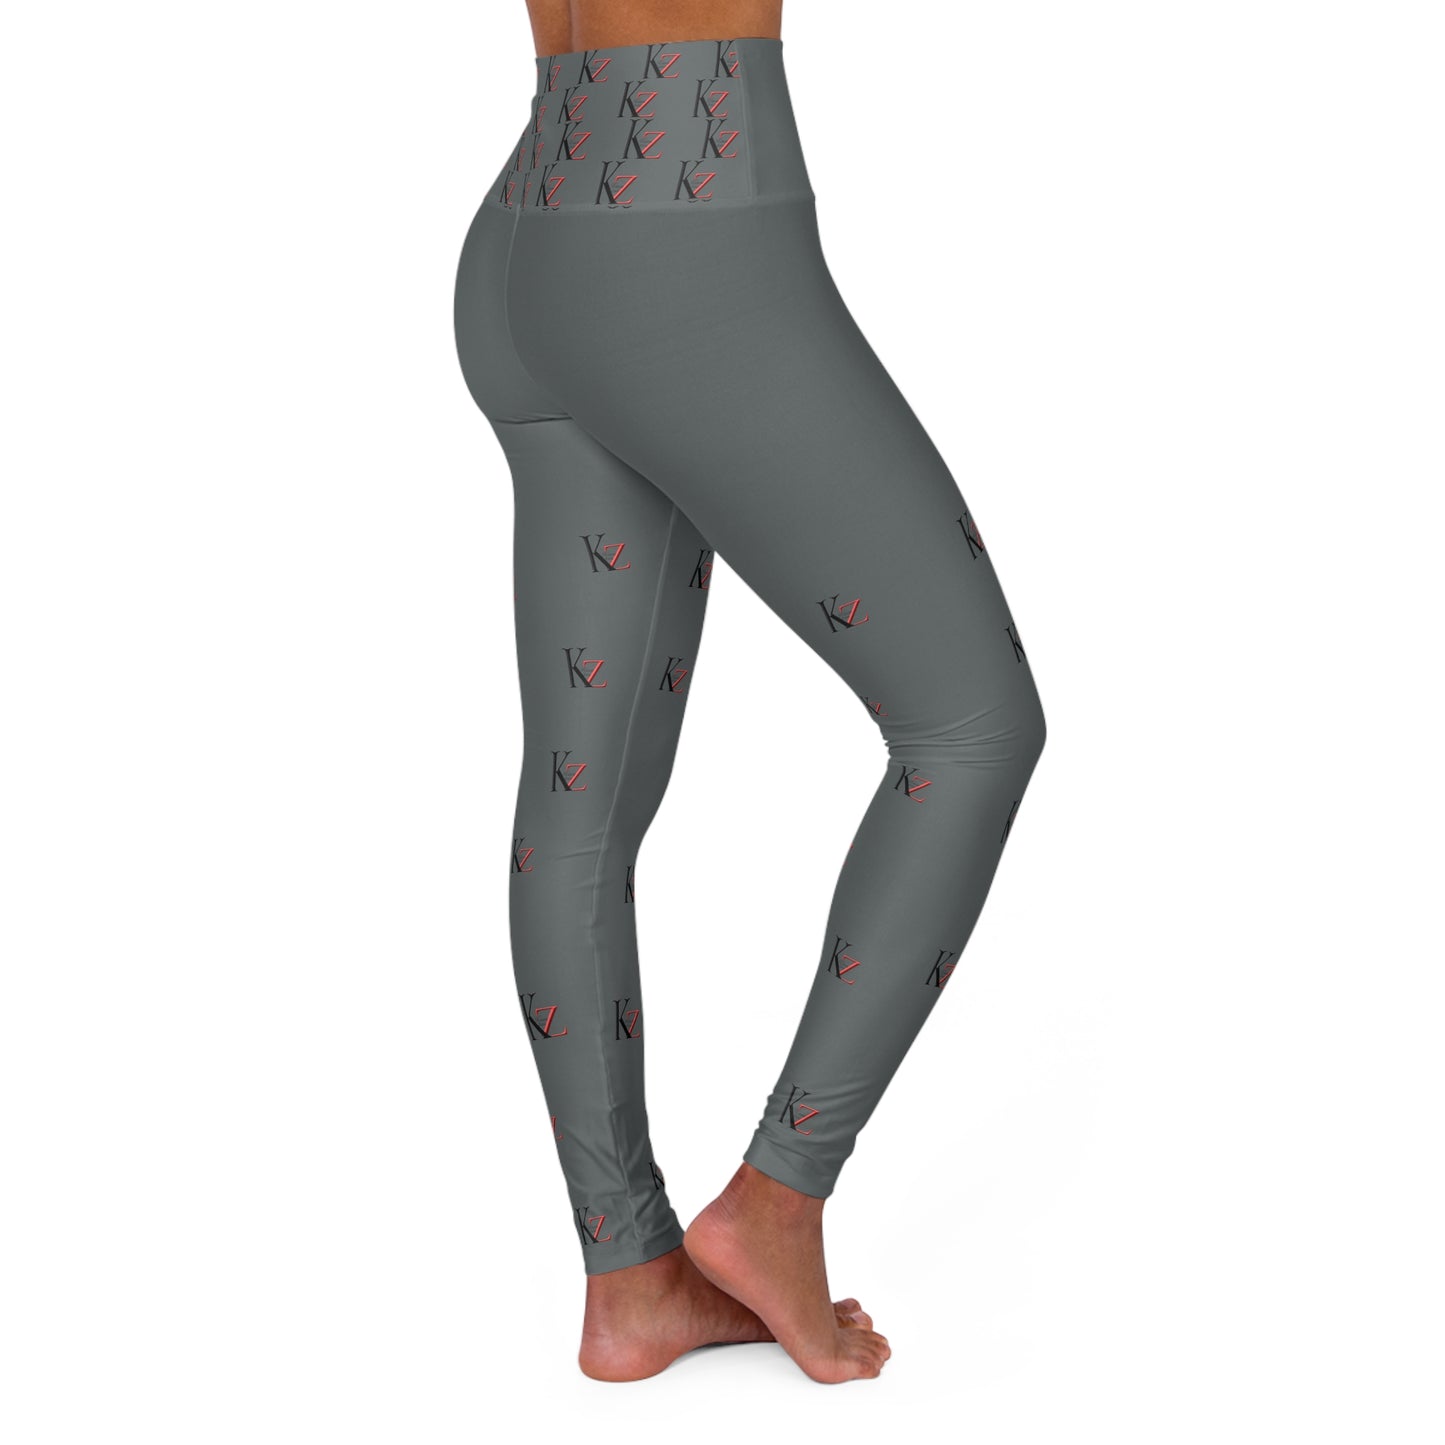 High Waisted KZ monogram Leggings (Dark Gray-Crome) For an optimal fit, check out the KZ monogram Leggings. Crafted with stretchy fabric, these leggings feature a high-waisted and slim fit. Plus, the iconic Kalent Zaiz logo is featured around the waistband.